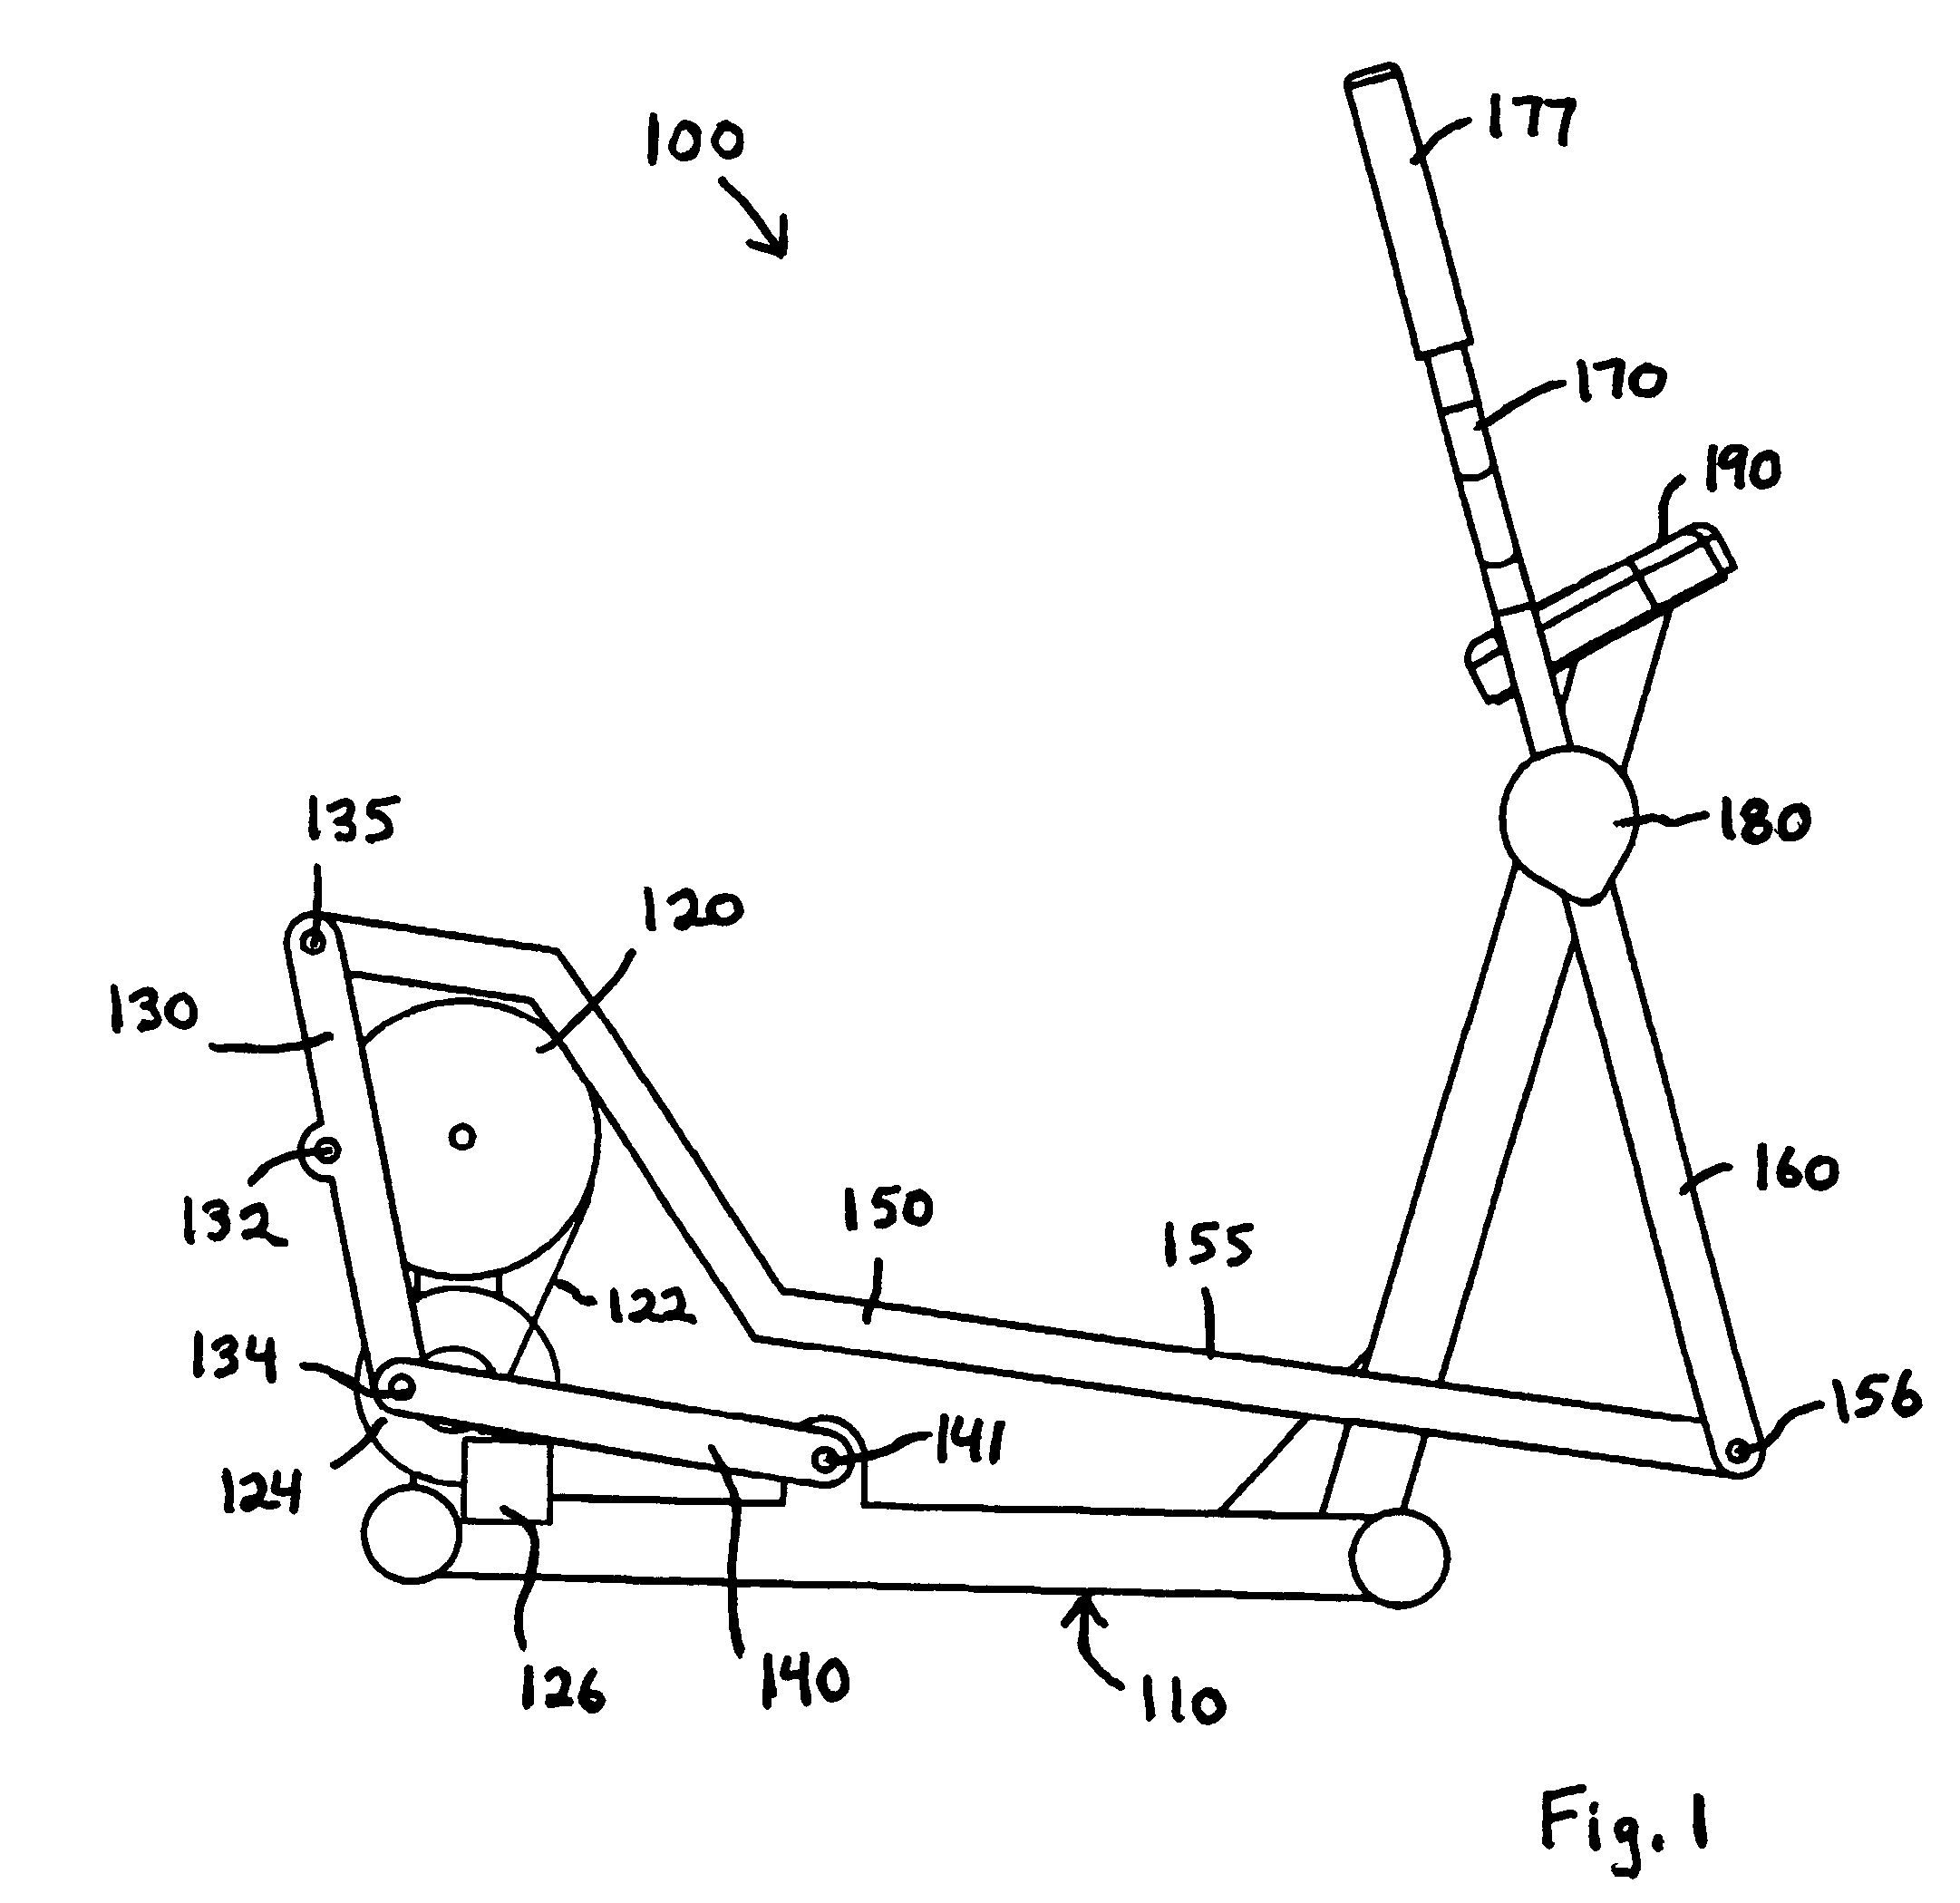 Total body exercise methods and apparatus